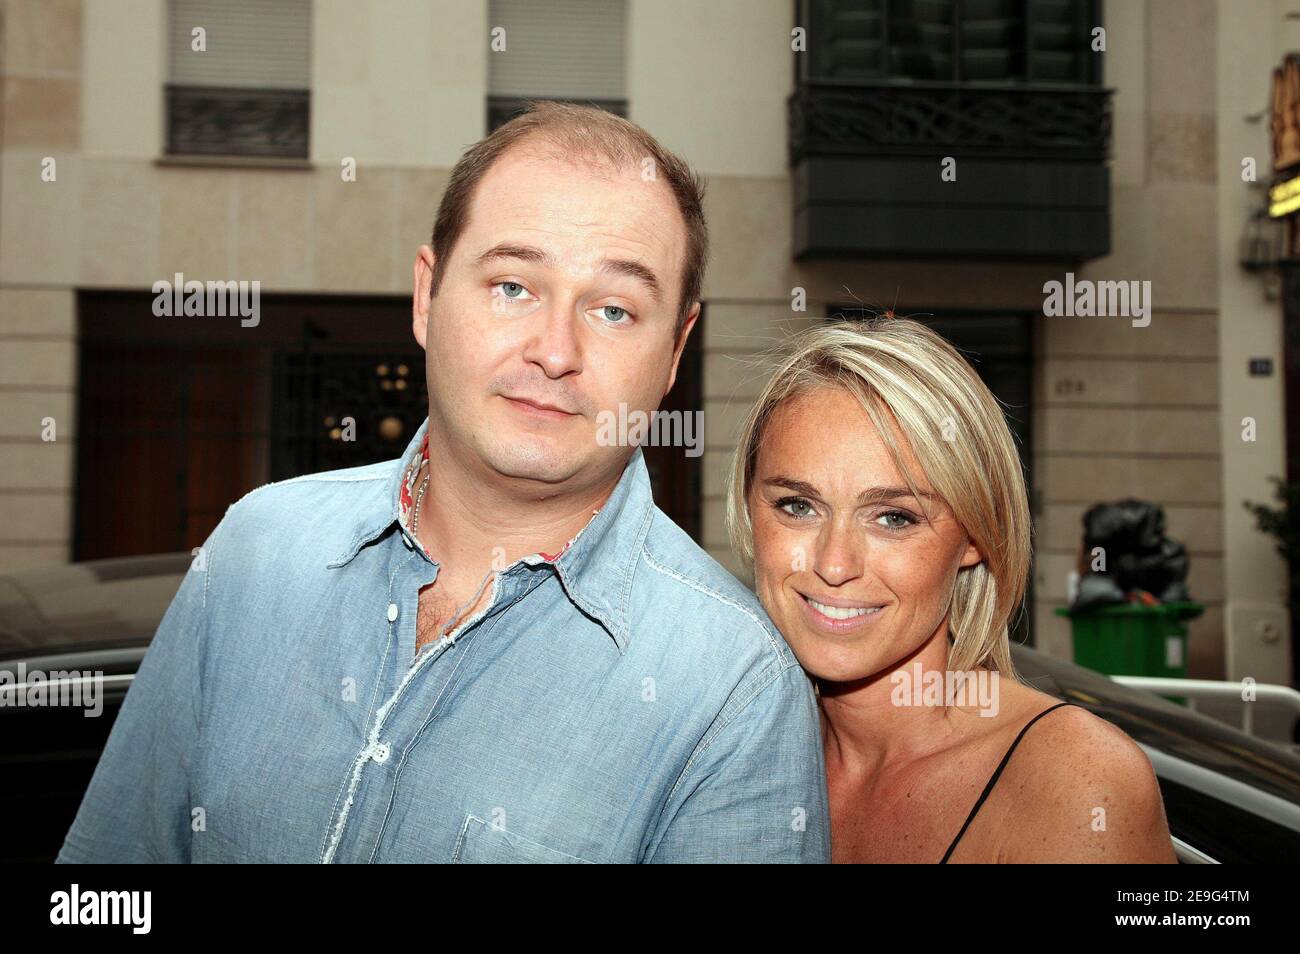 EXCLUSIVE. French TV presenters Sebastien Cauet and Cecile de Menibus pose  while leaving 'Fun Radio' radio station in Paris, France on september 15,  2006. Photo by Denis Guignebourg/ABACAPRESS.COM Stock Photo - Alamy